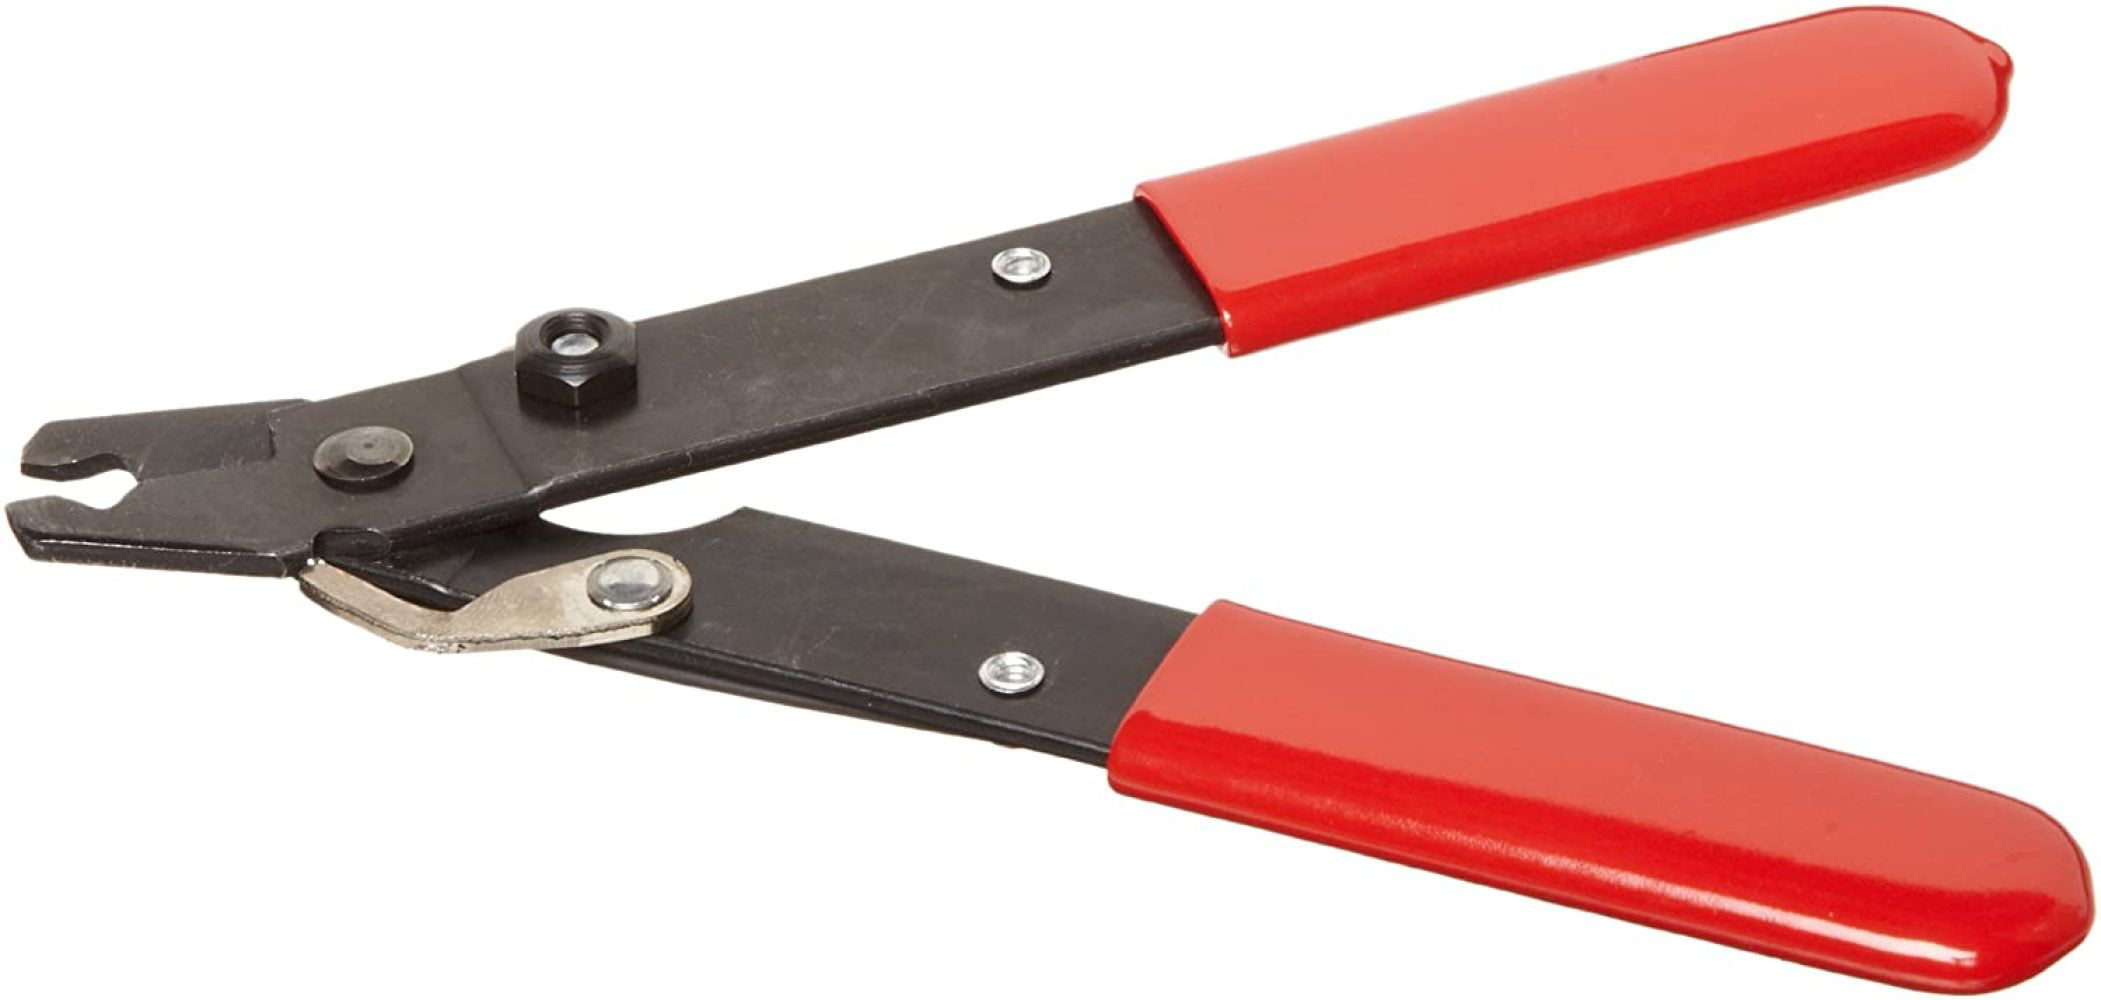 5" Wire Stripper & Cutter with Self-opening Cushion Grip Handles Xcelite 101S 